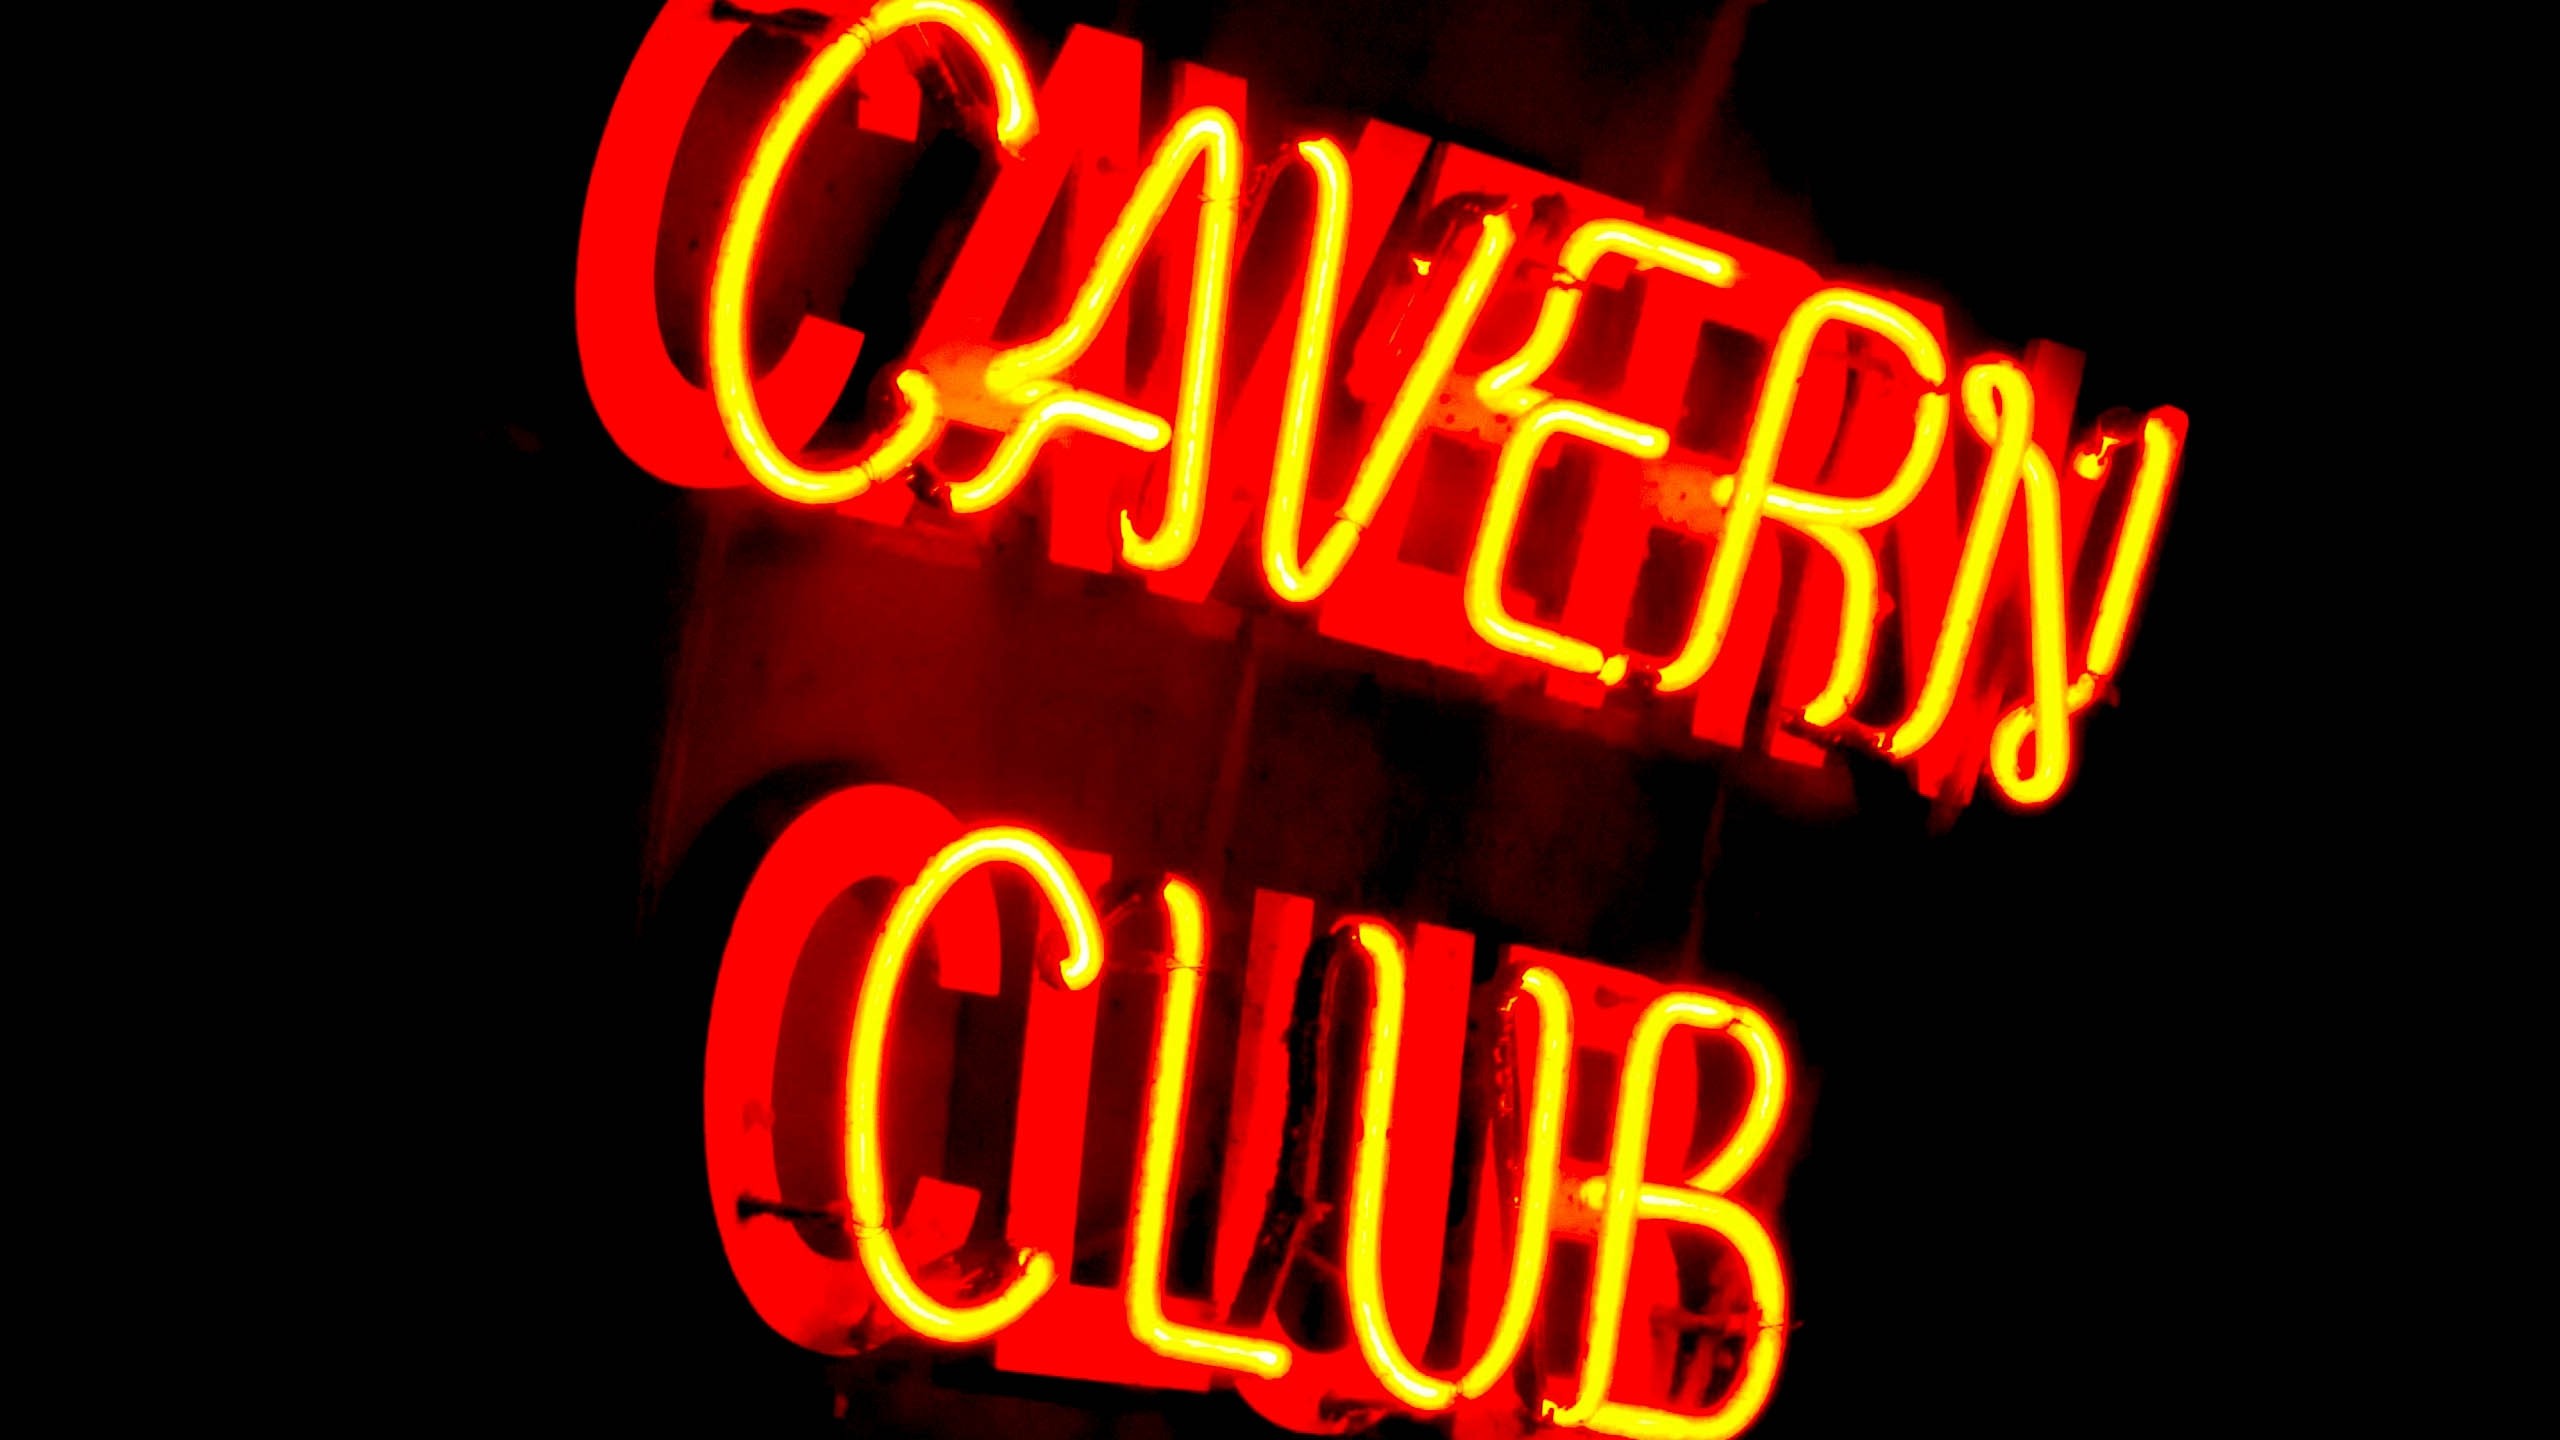 Neon sign of The Cavern Club, Liverpool